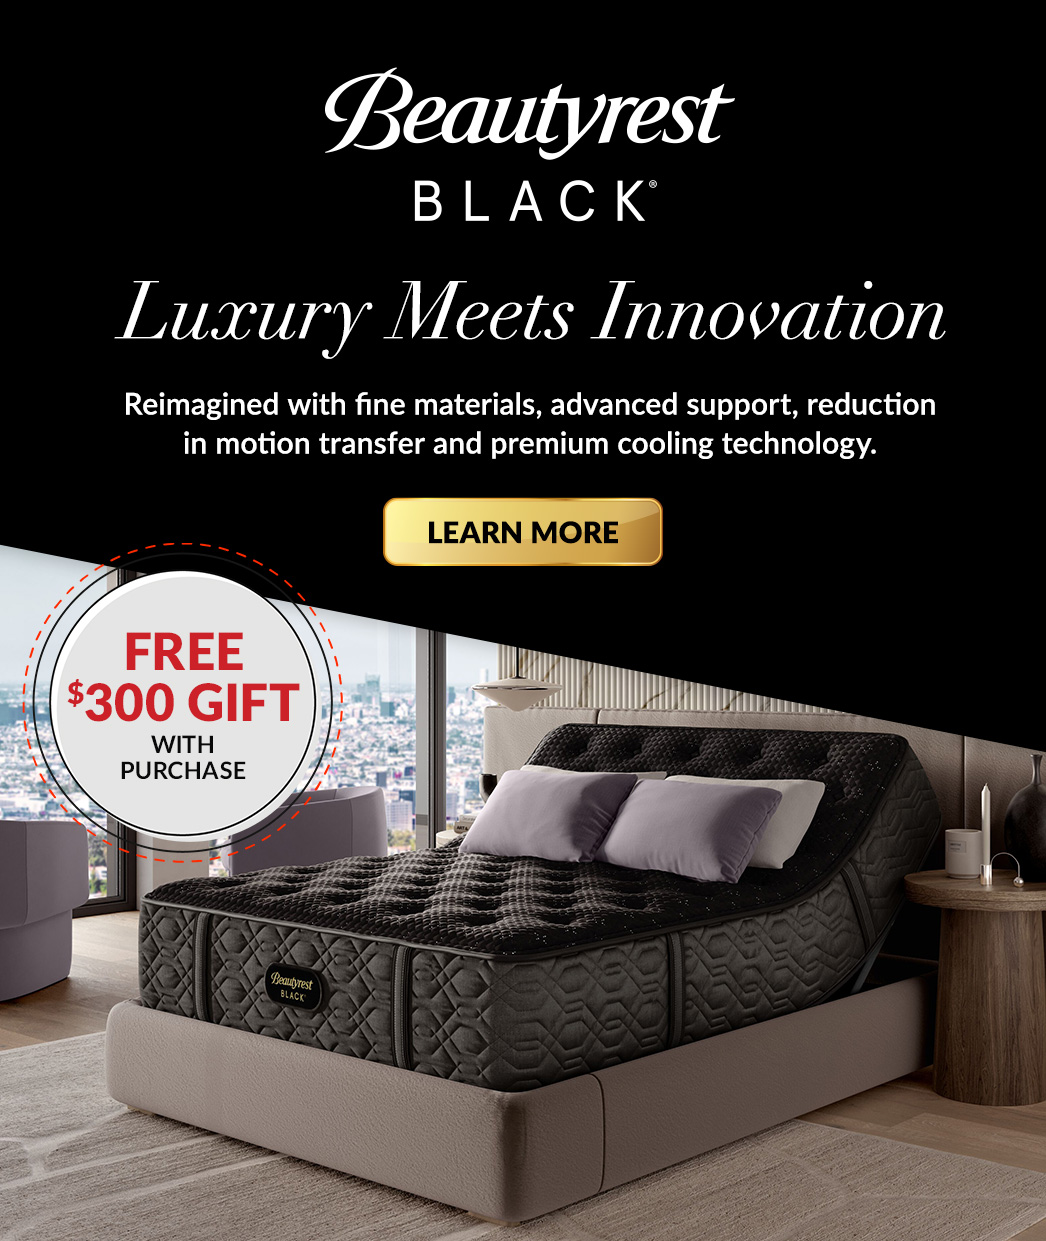 Learn more about Beautyrest Black